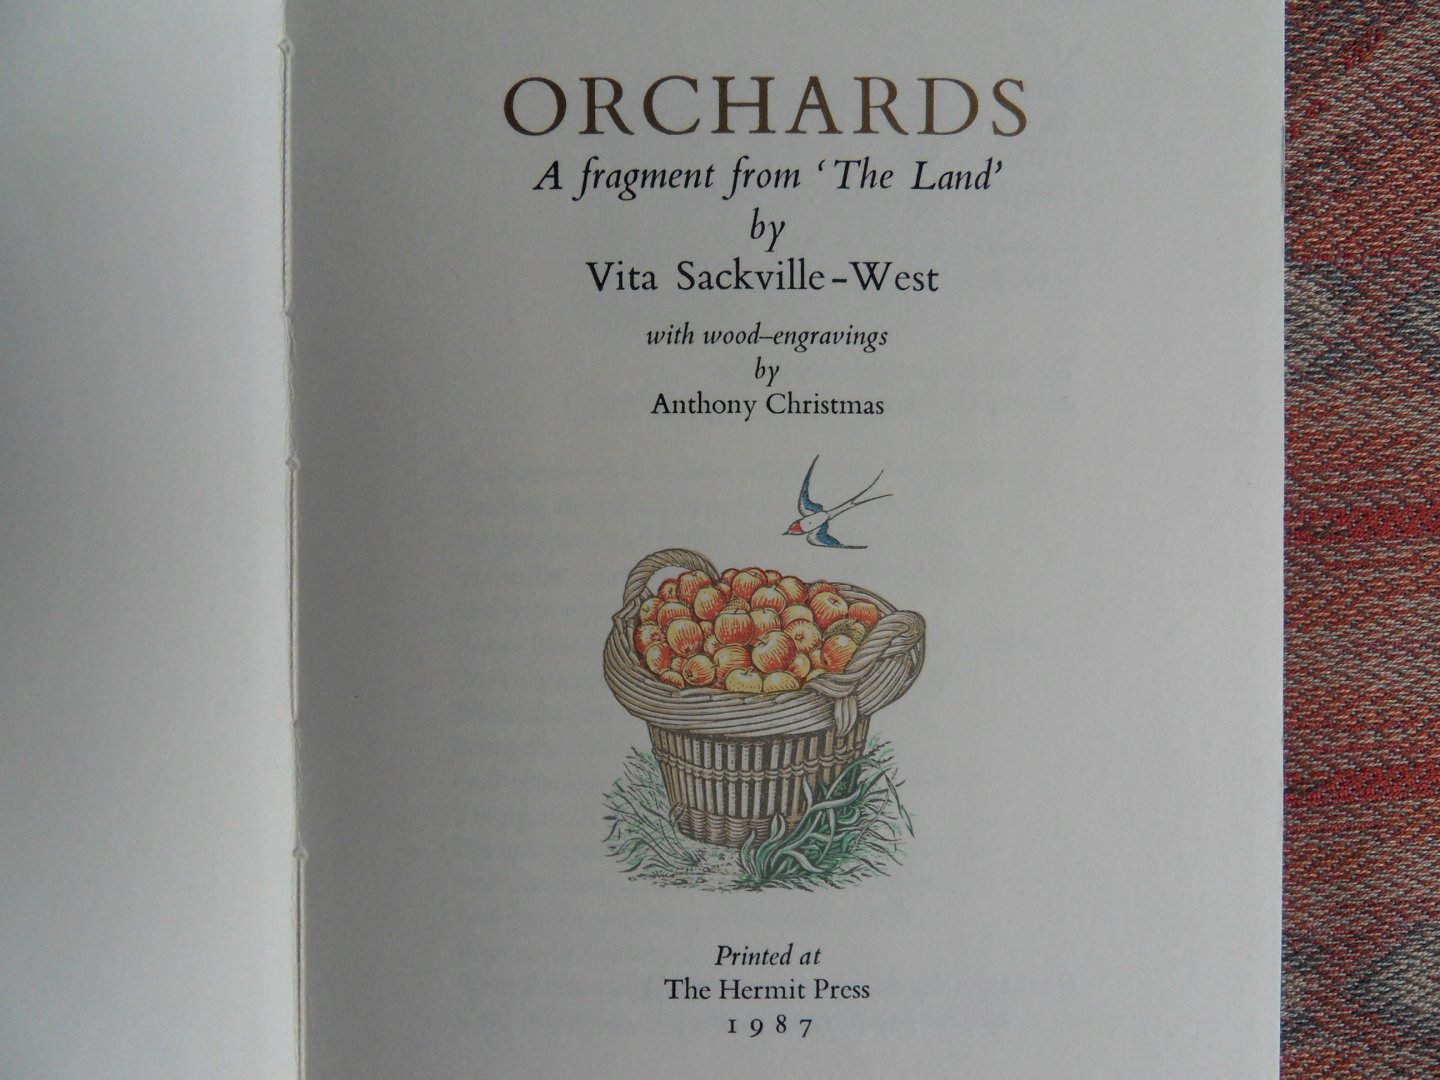 Sackville-West, Vita. - Orchards. - A fragment from 'The Land'. - With wood-engravings by Anthony Christmas. [Genummerd ex. 212 / 250 ].